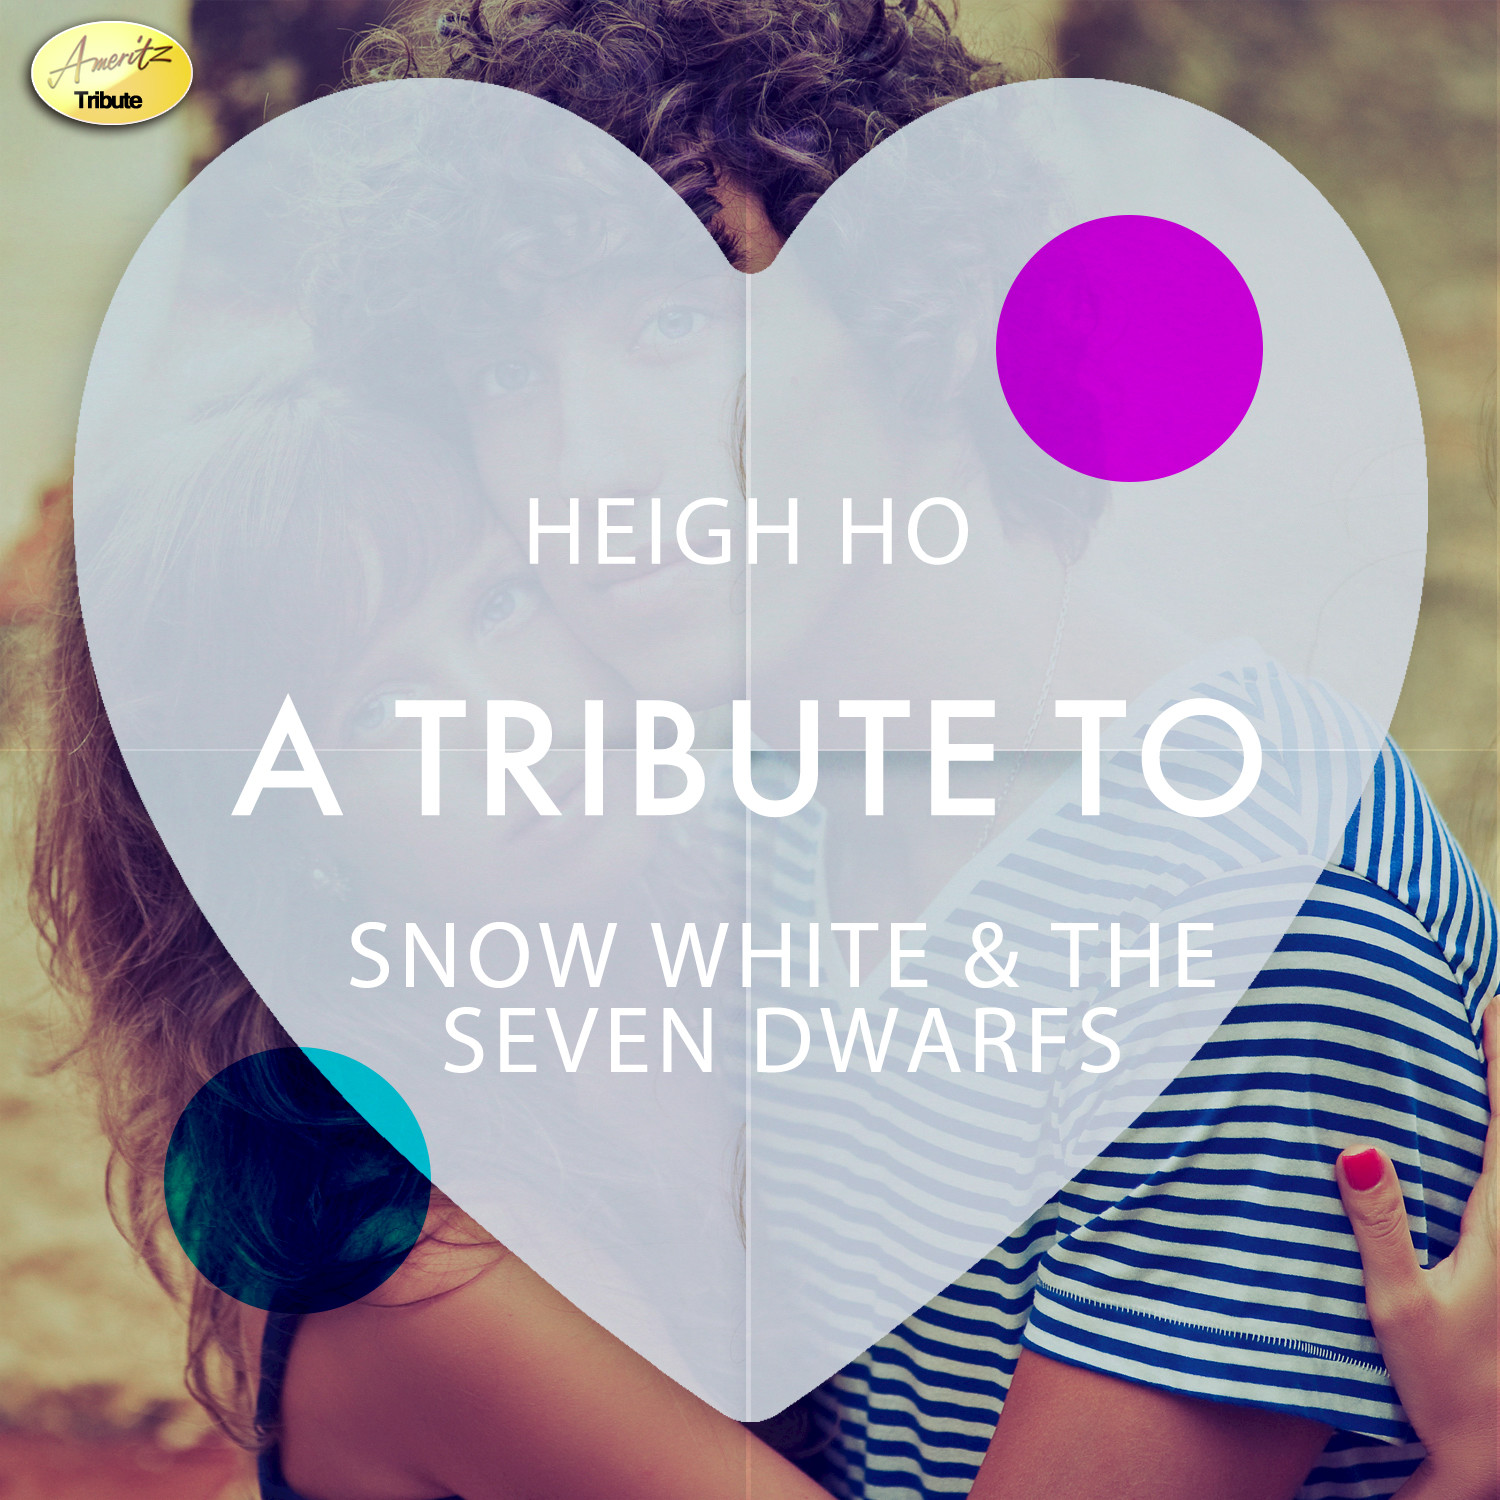 Heigh Ho - A Tribute to Snow White & The Seven Dwarfs